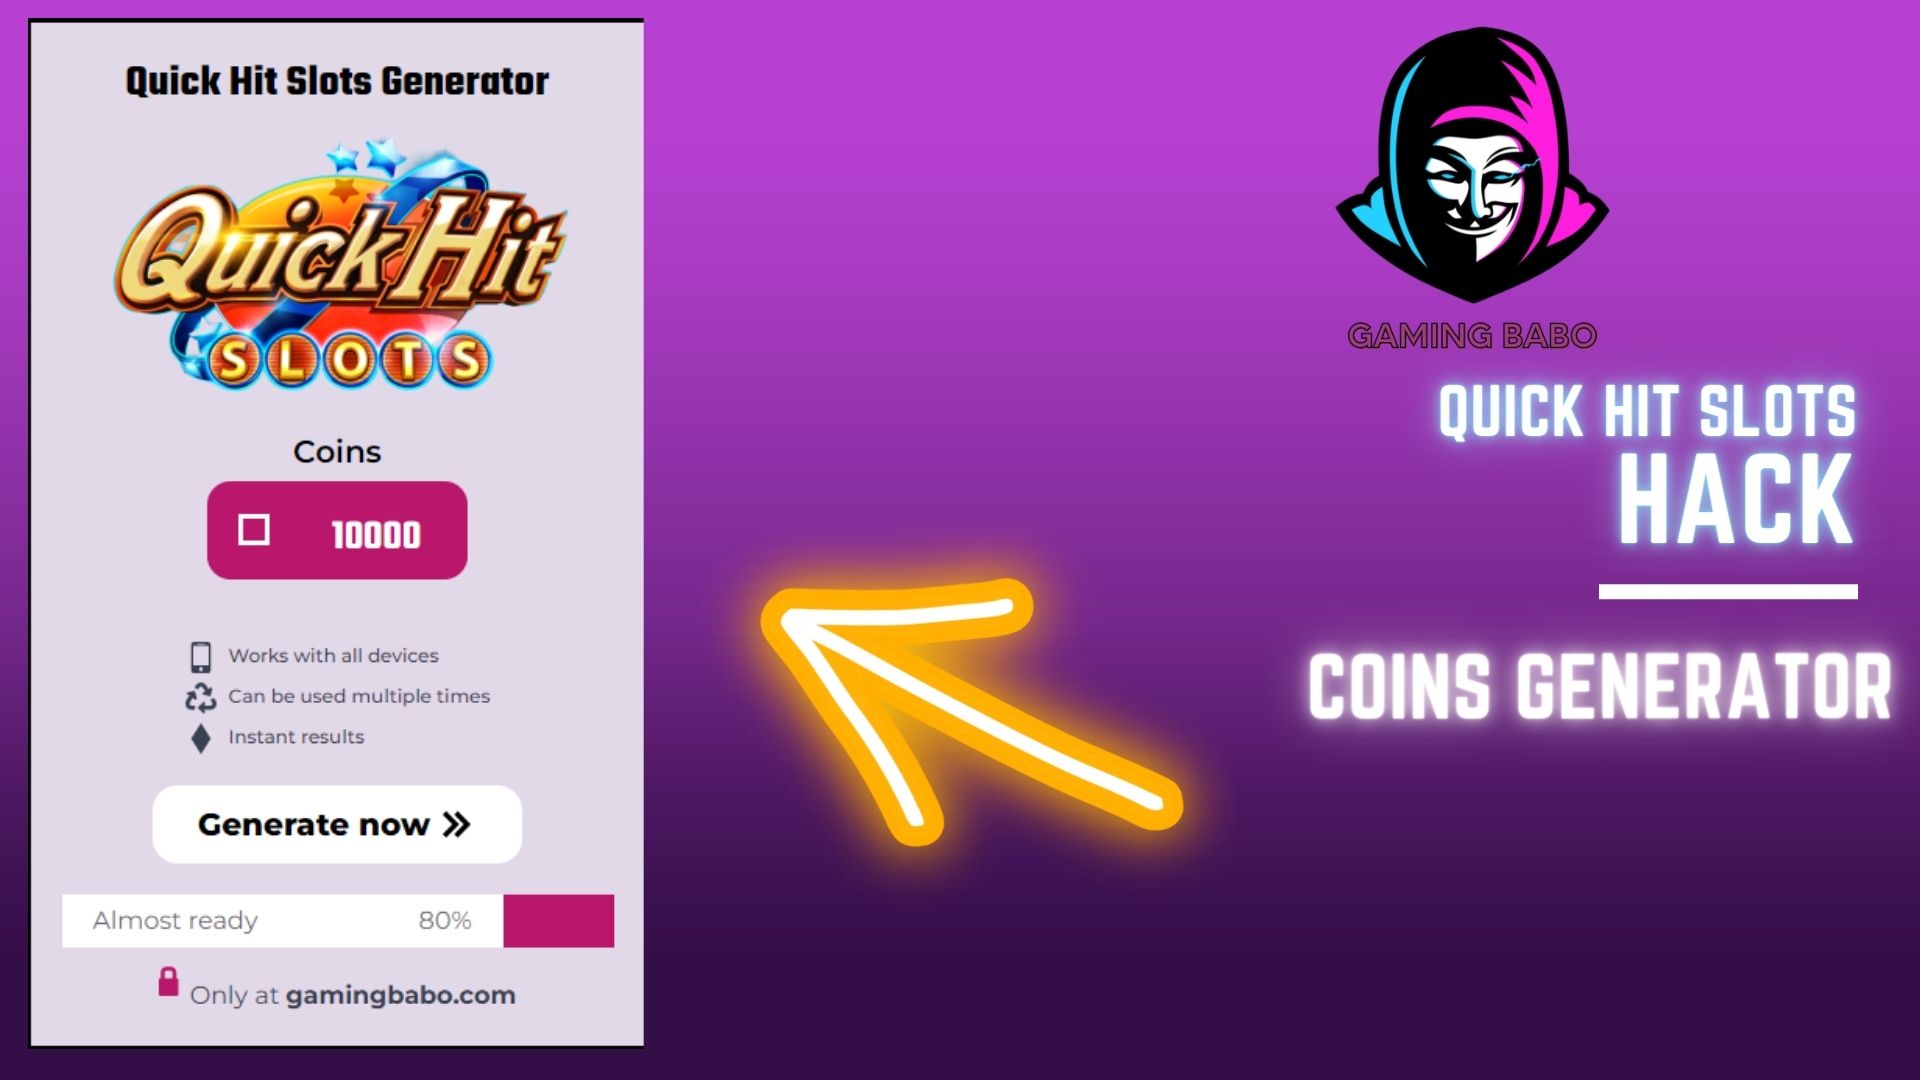 Free unlimited coins for Quick Hit Slots